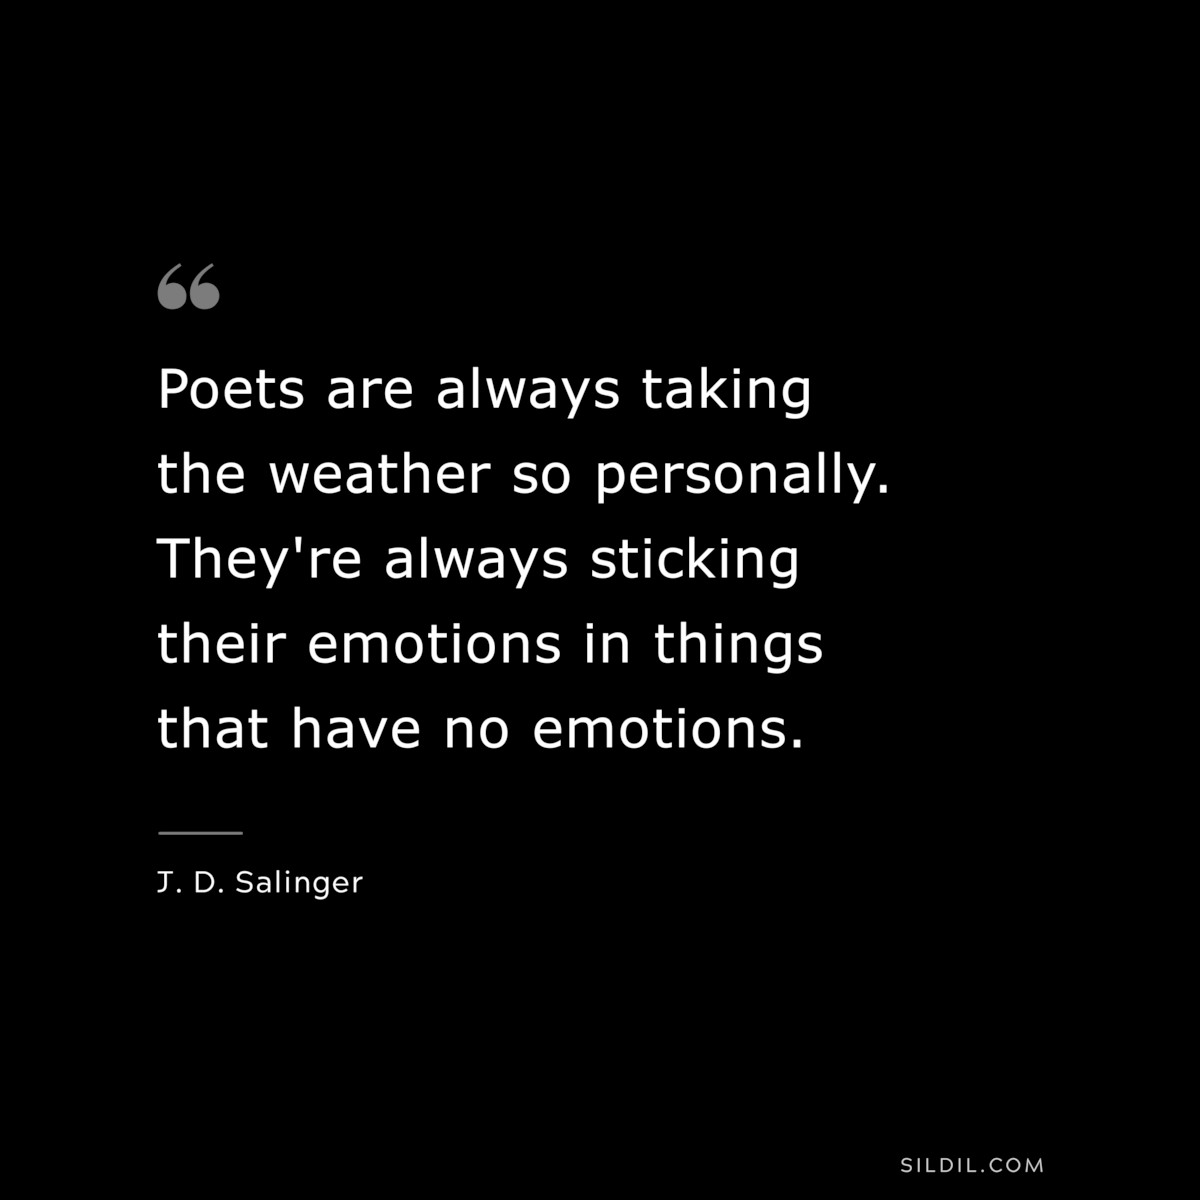 Poets are always taking the weather so personally. They're always sticking their emotions in things that have no emotions. — J. D. Salinger